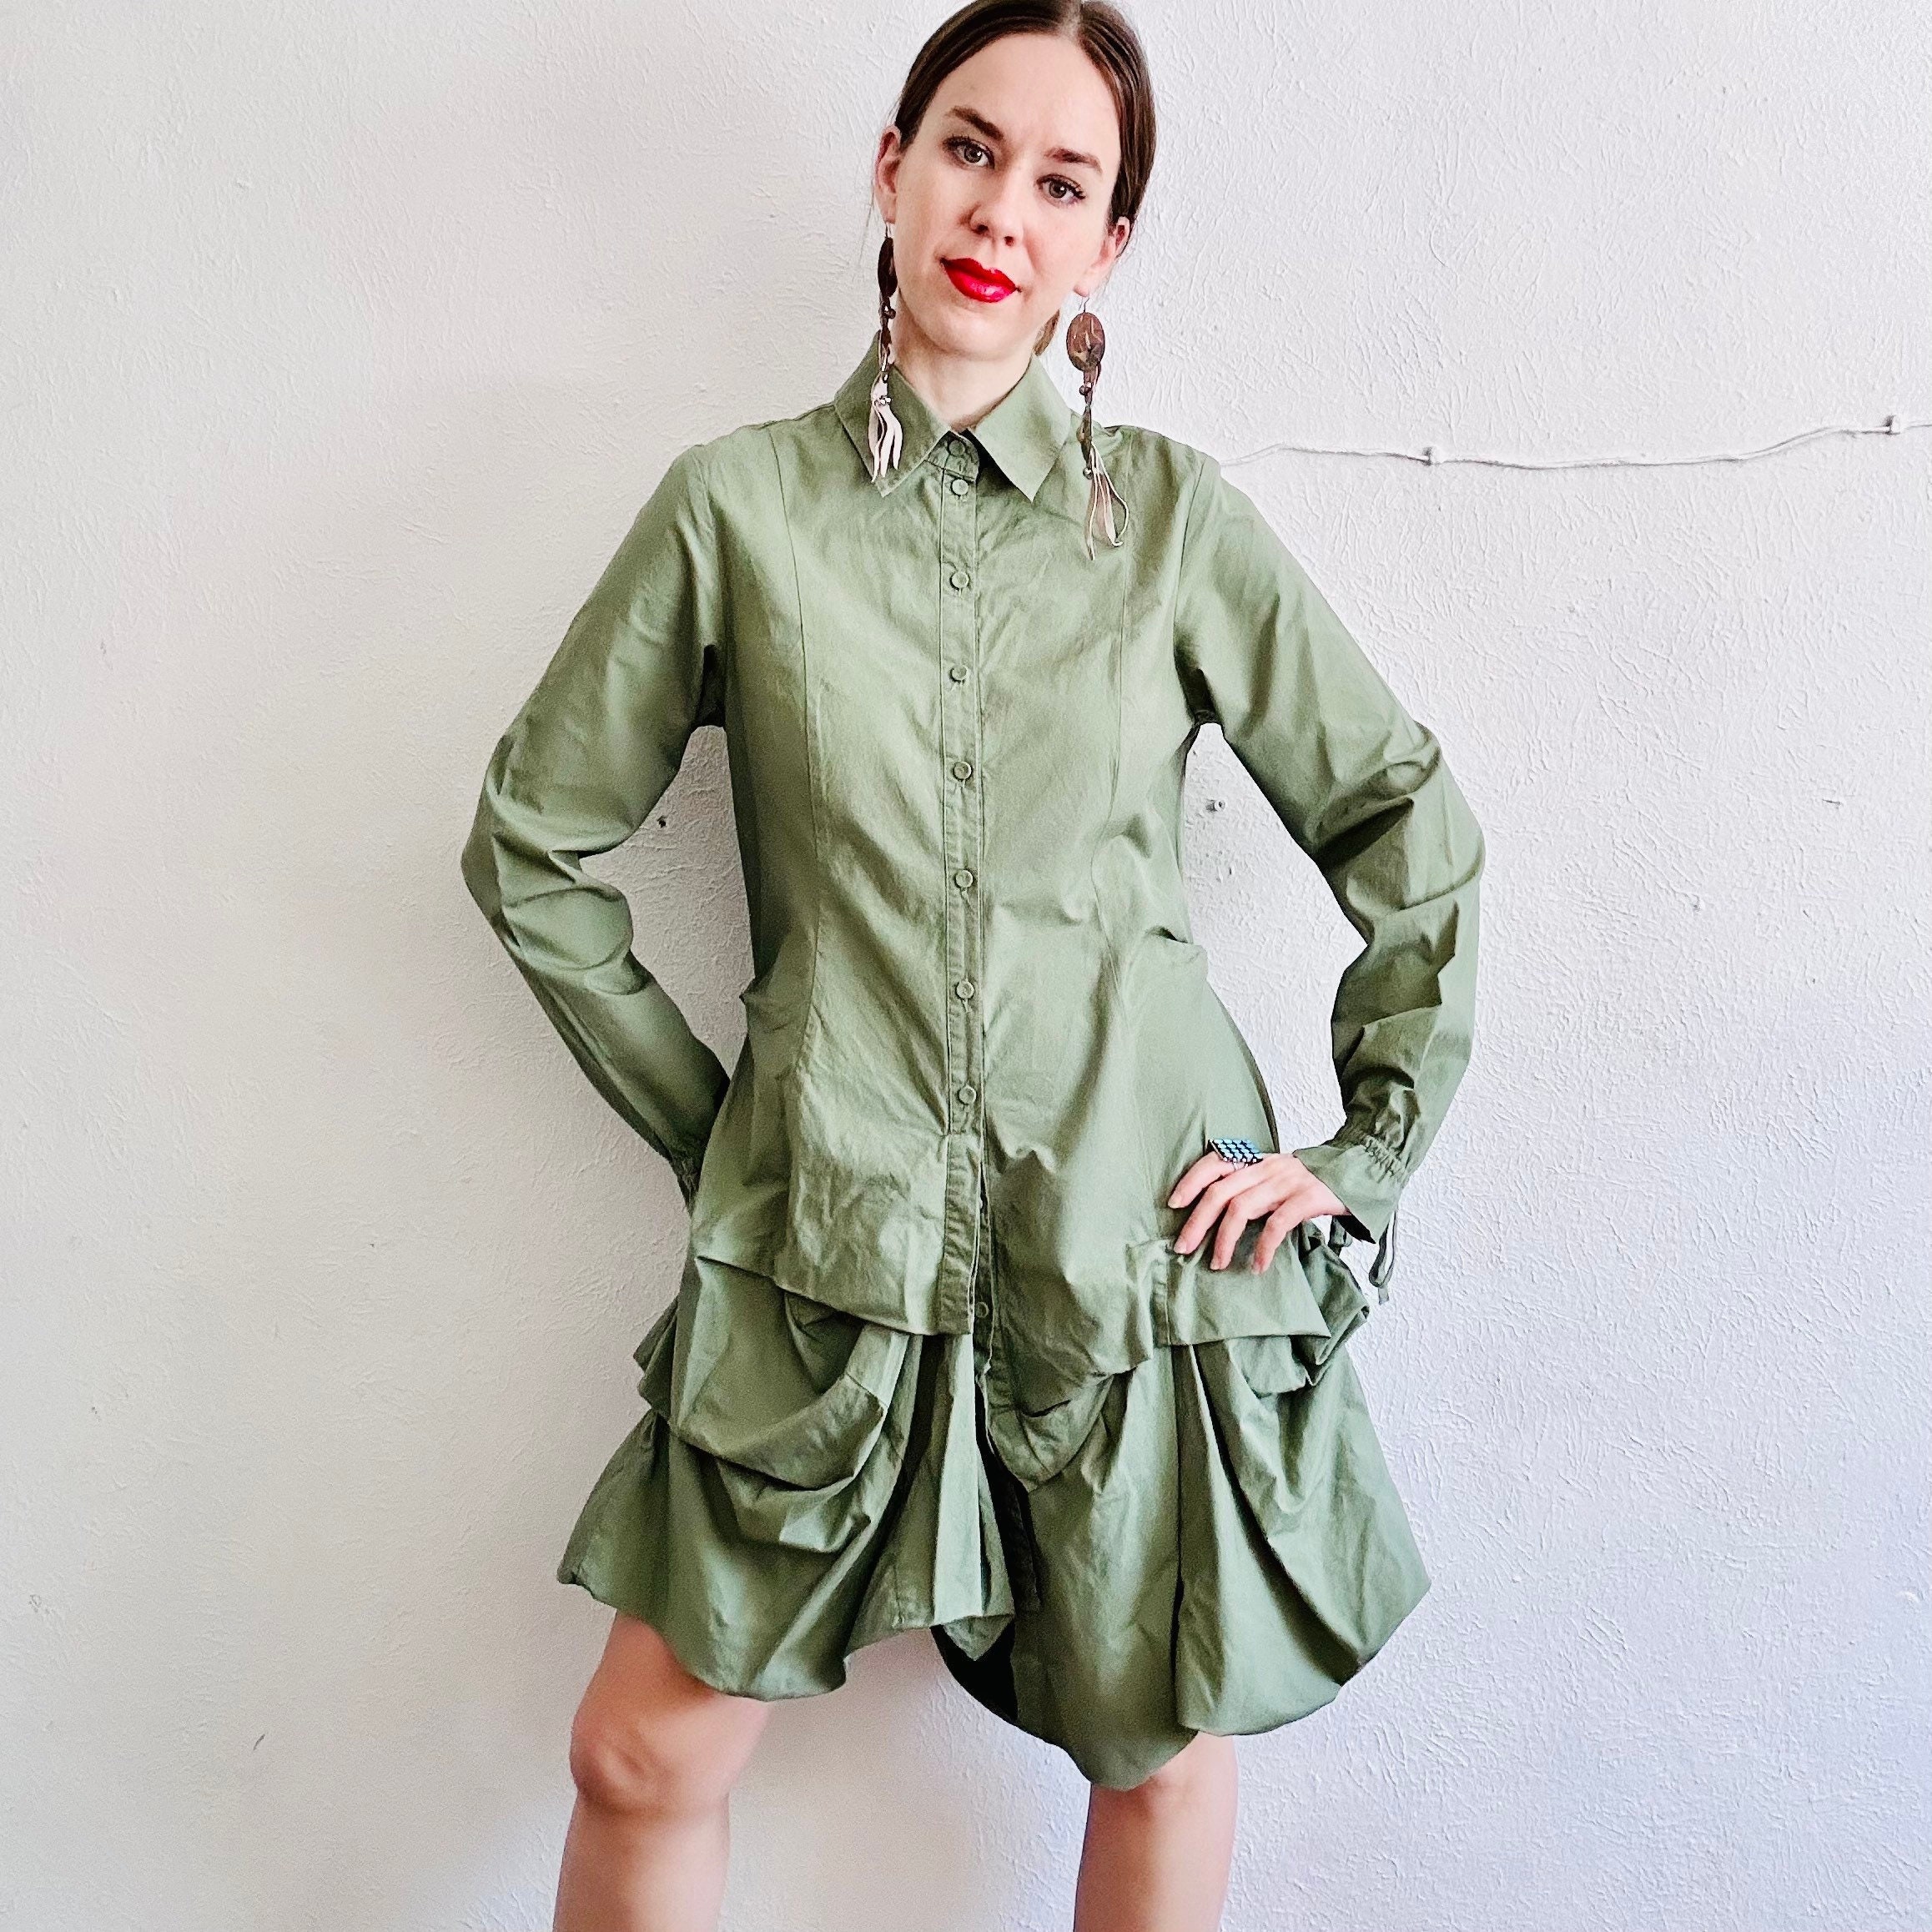 s Vintage Parachute Dress Small Y2K Green Cotton Long   Etsy